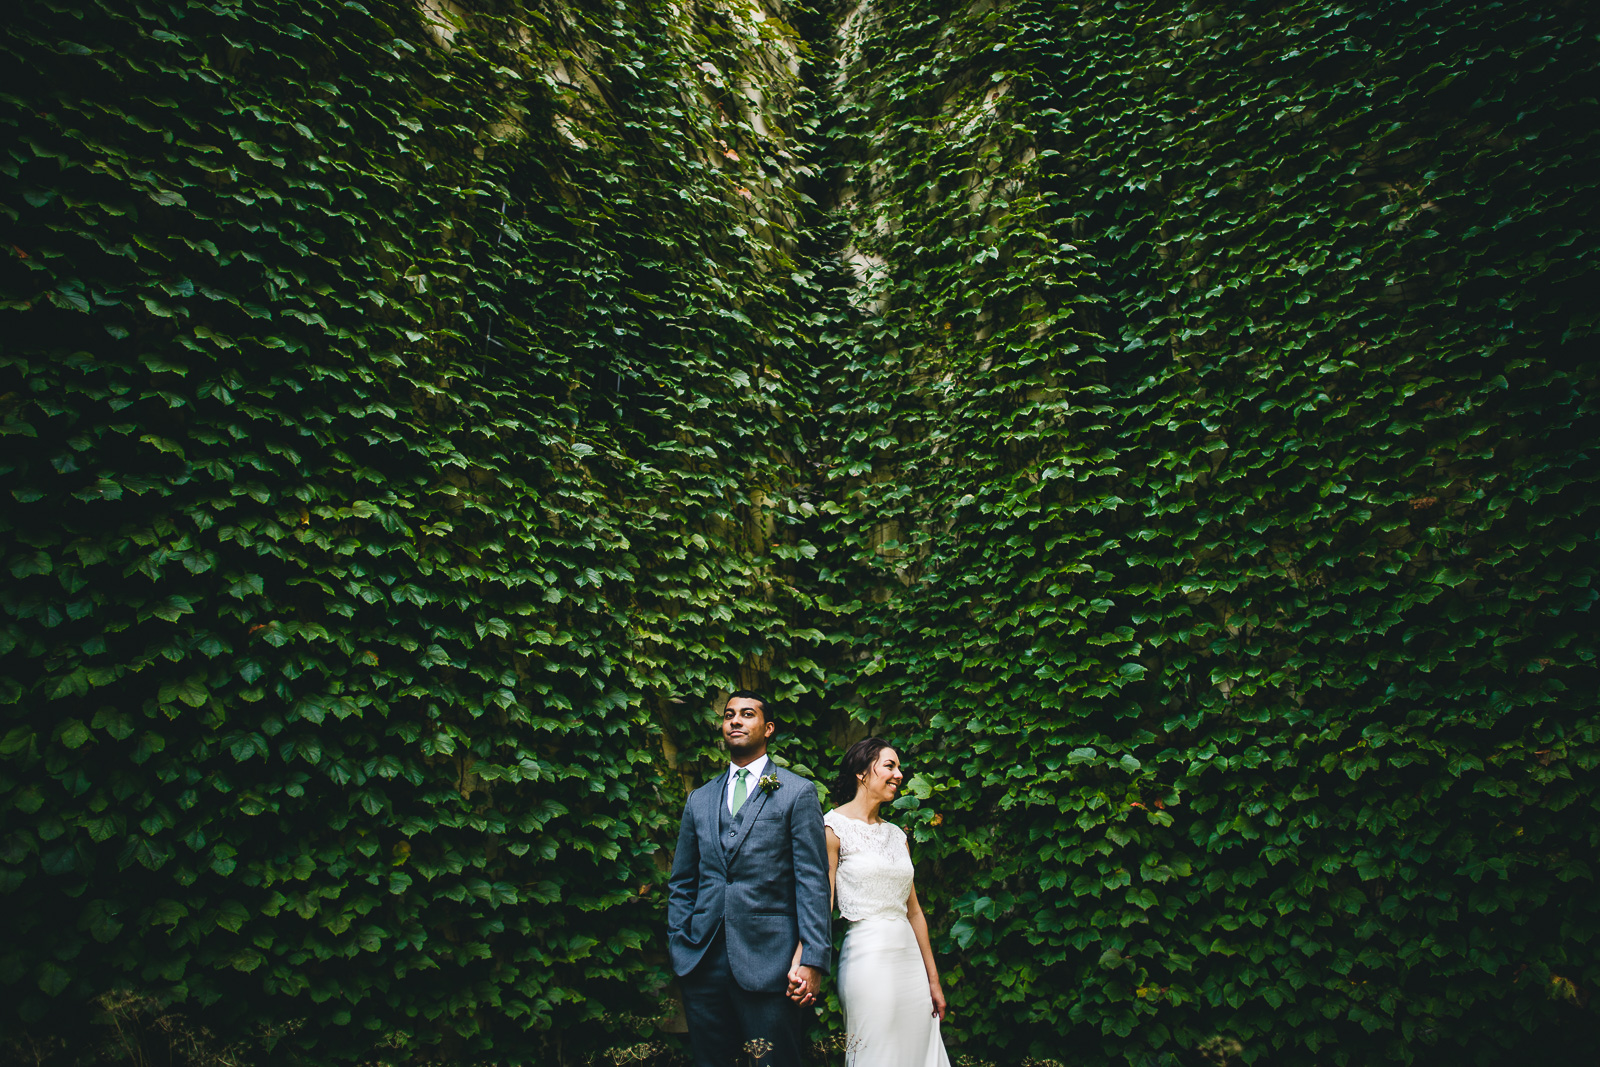 99 chicago wedding photographer best portraits during weddings review - 2018 in Review // My Favorite Chicago Wedding Photography Portraits